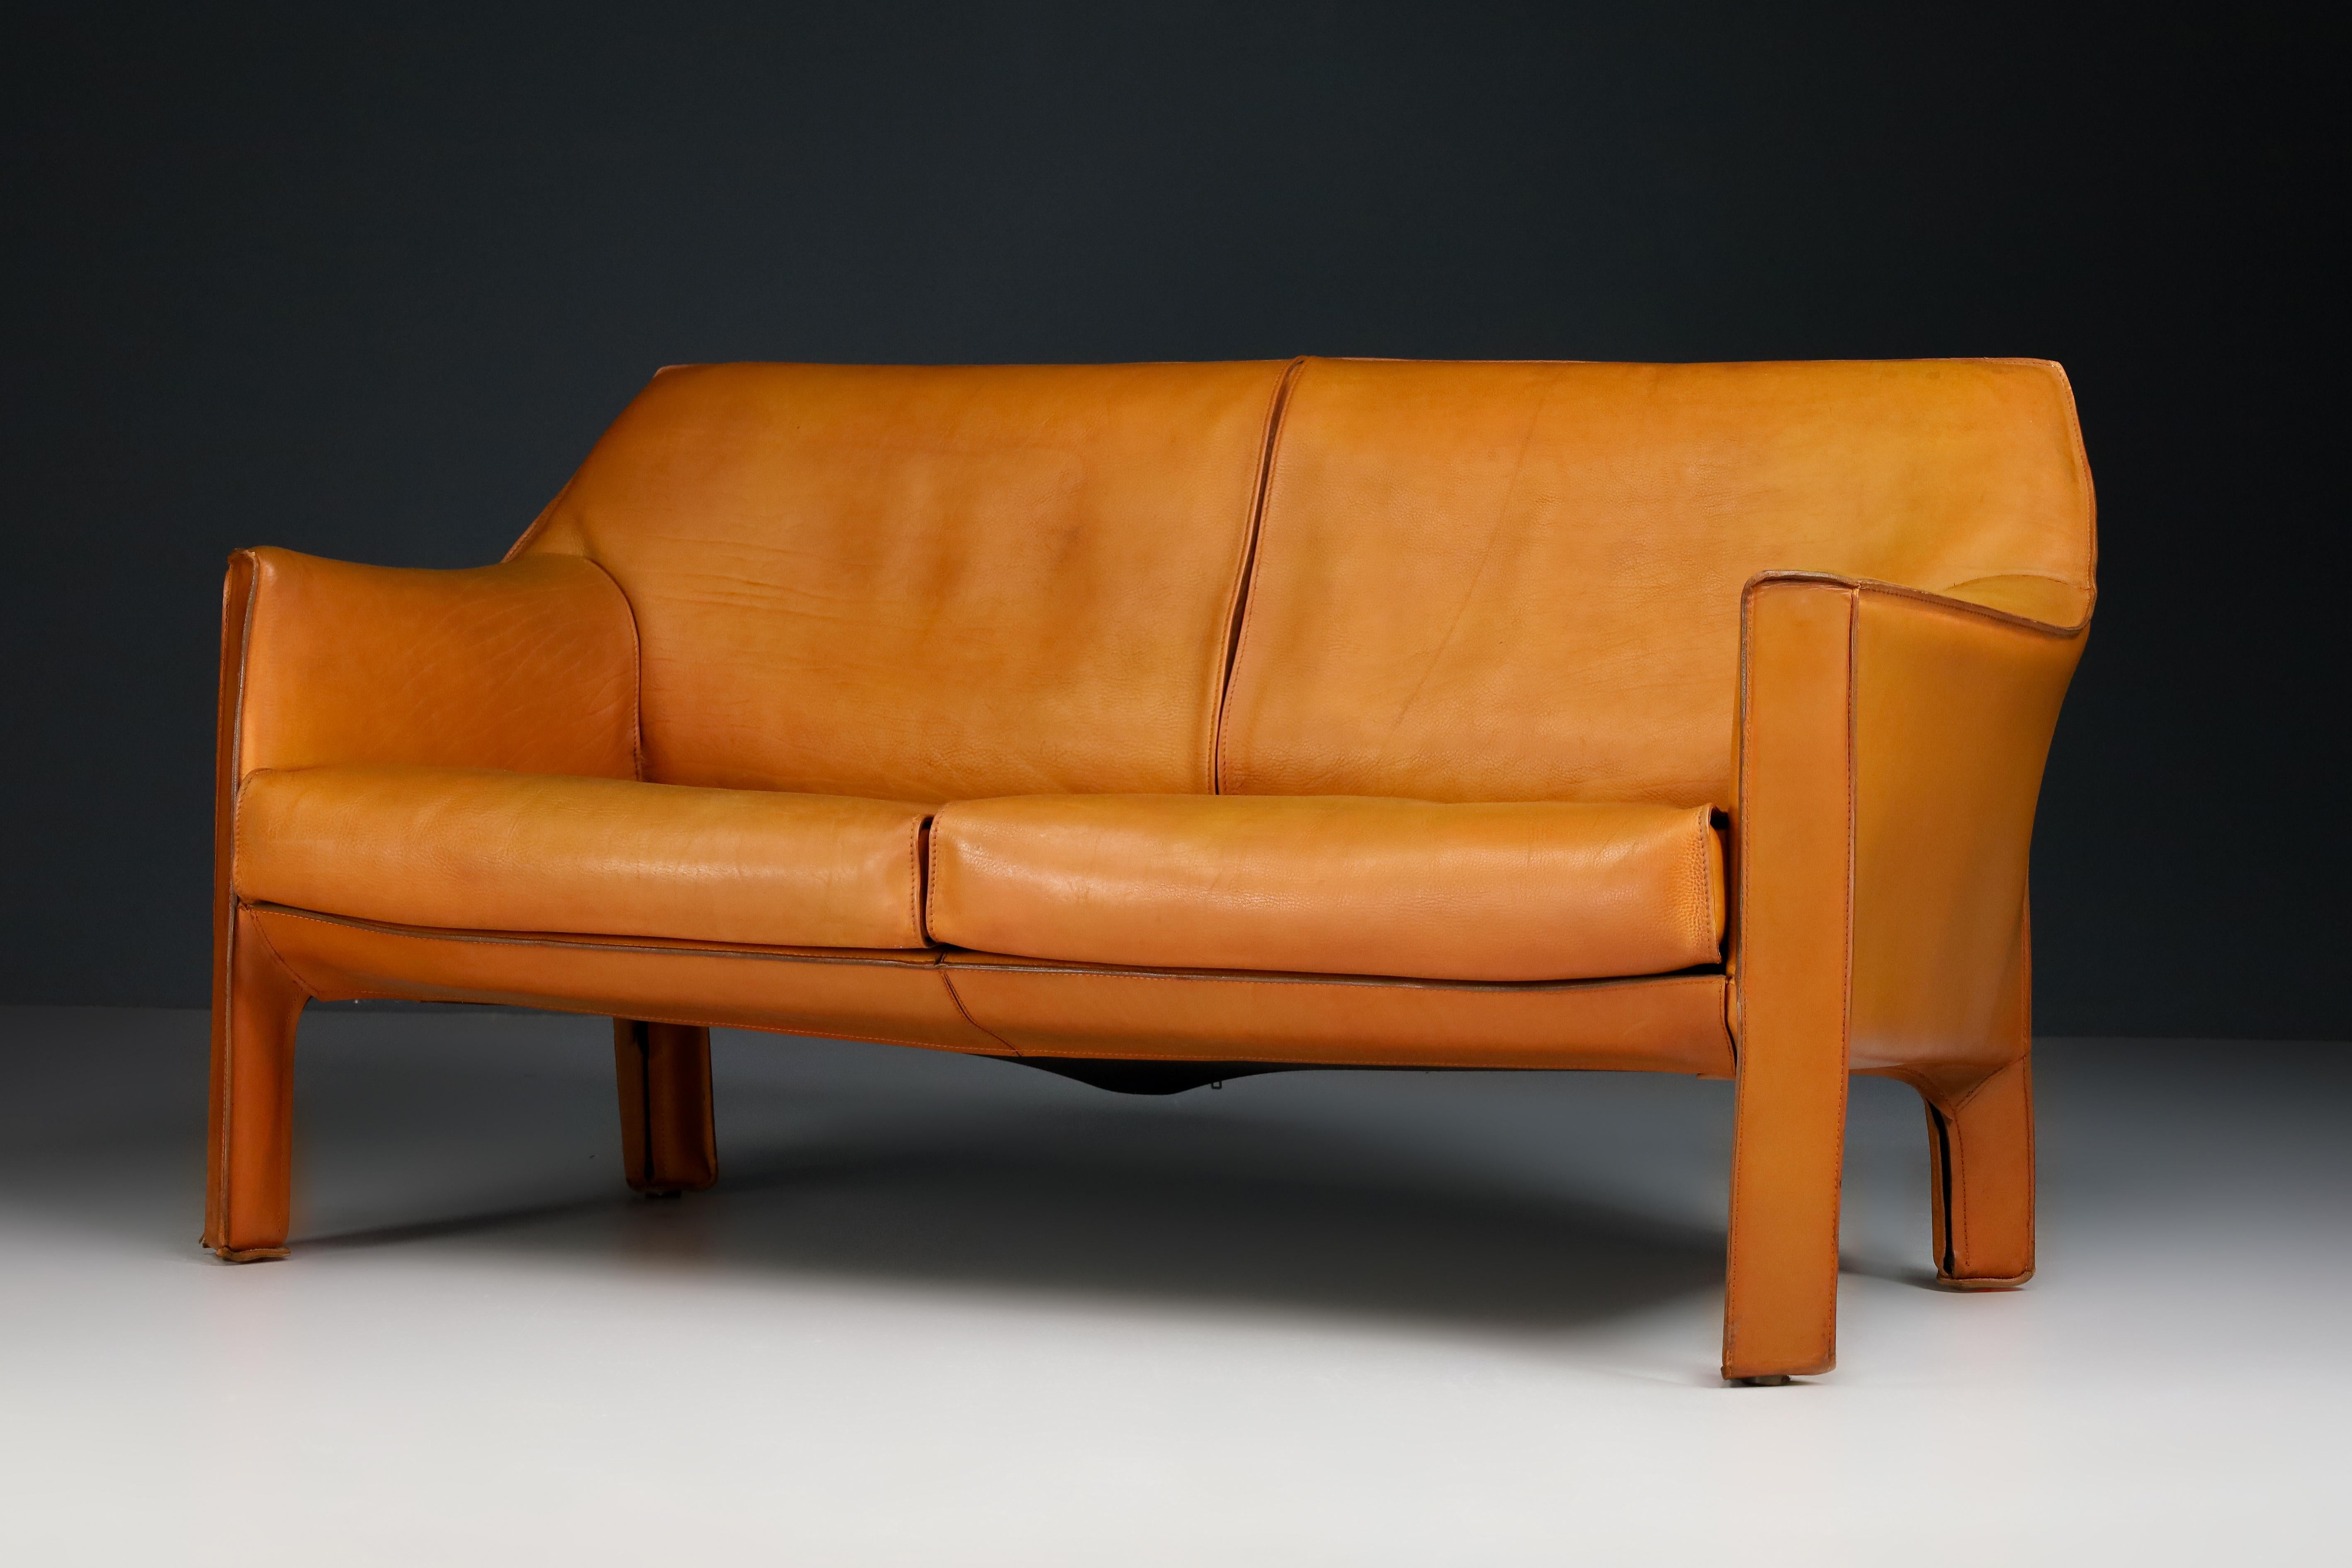 A beautiful rare out-of-production Mario Bellini Model 415 'Cab' two seat sofa in incredible thick Patinated Buffalo Cognac leather, by Cassina (signed), designed in the 1970s, this early production examples produced in circa 1980s. This fine